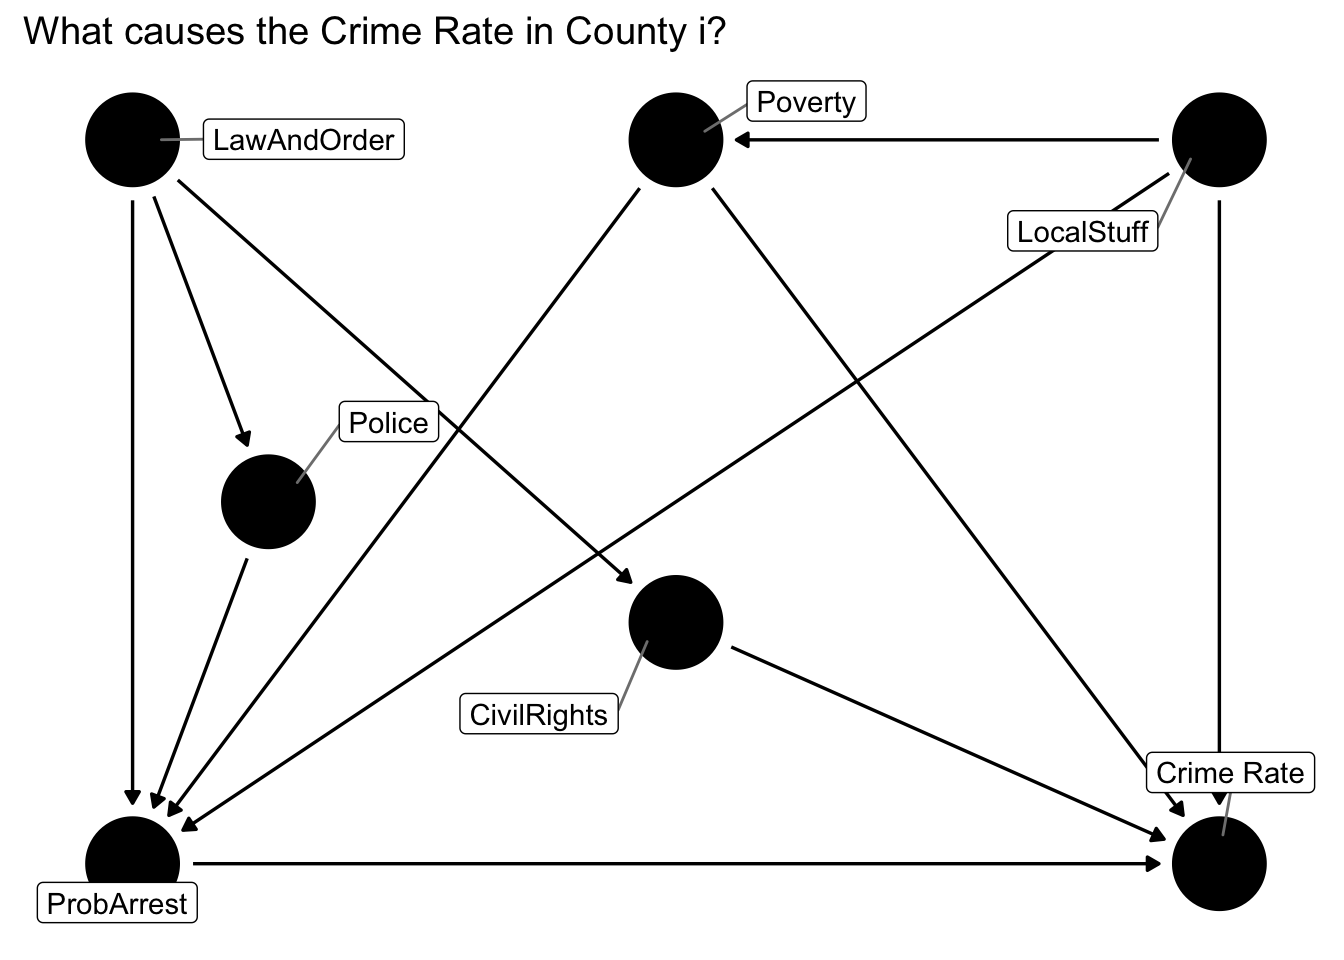 DAG to answer *what causes the local crime rate?*